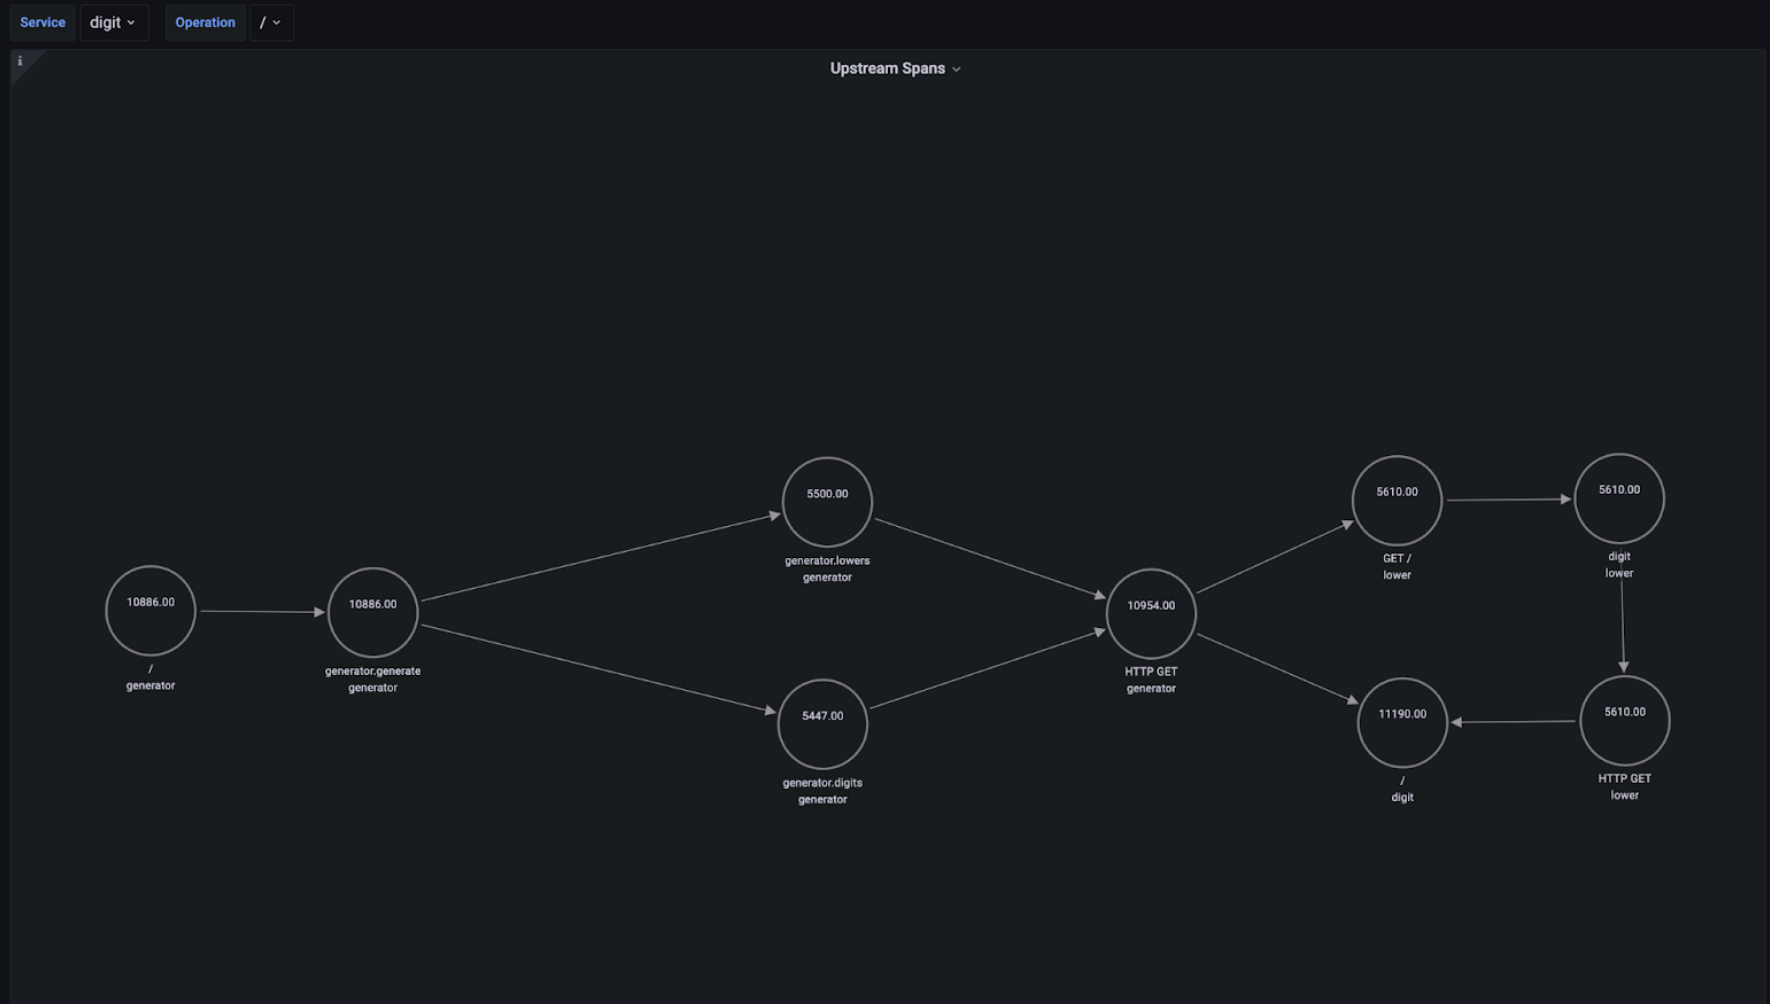 Grafana node graph showing upstream services and operations.